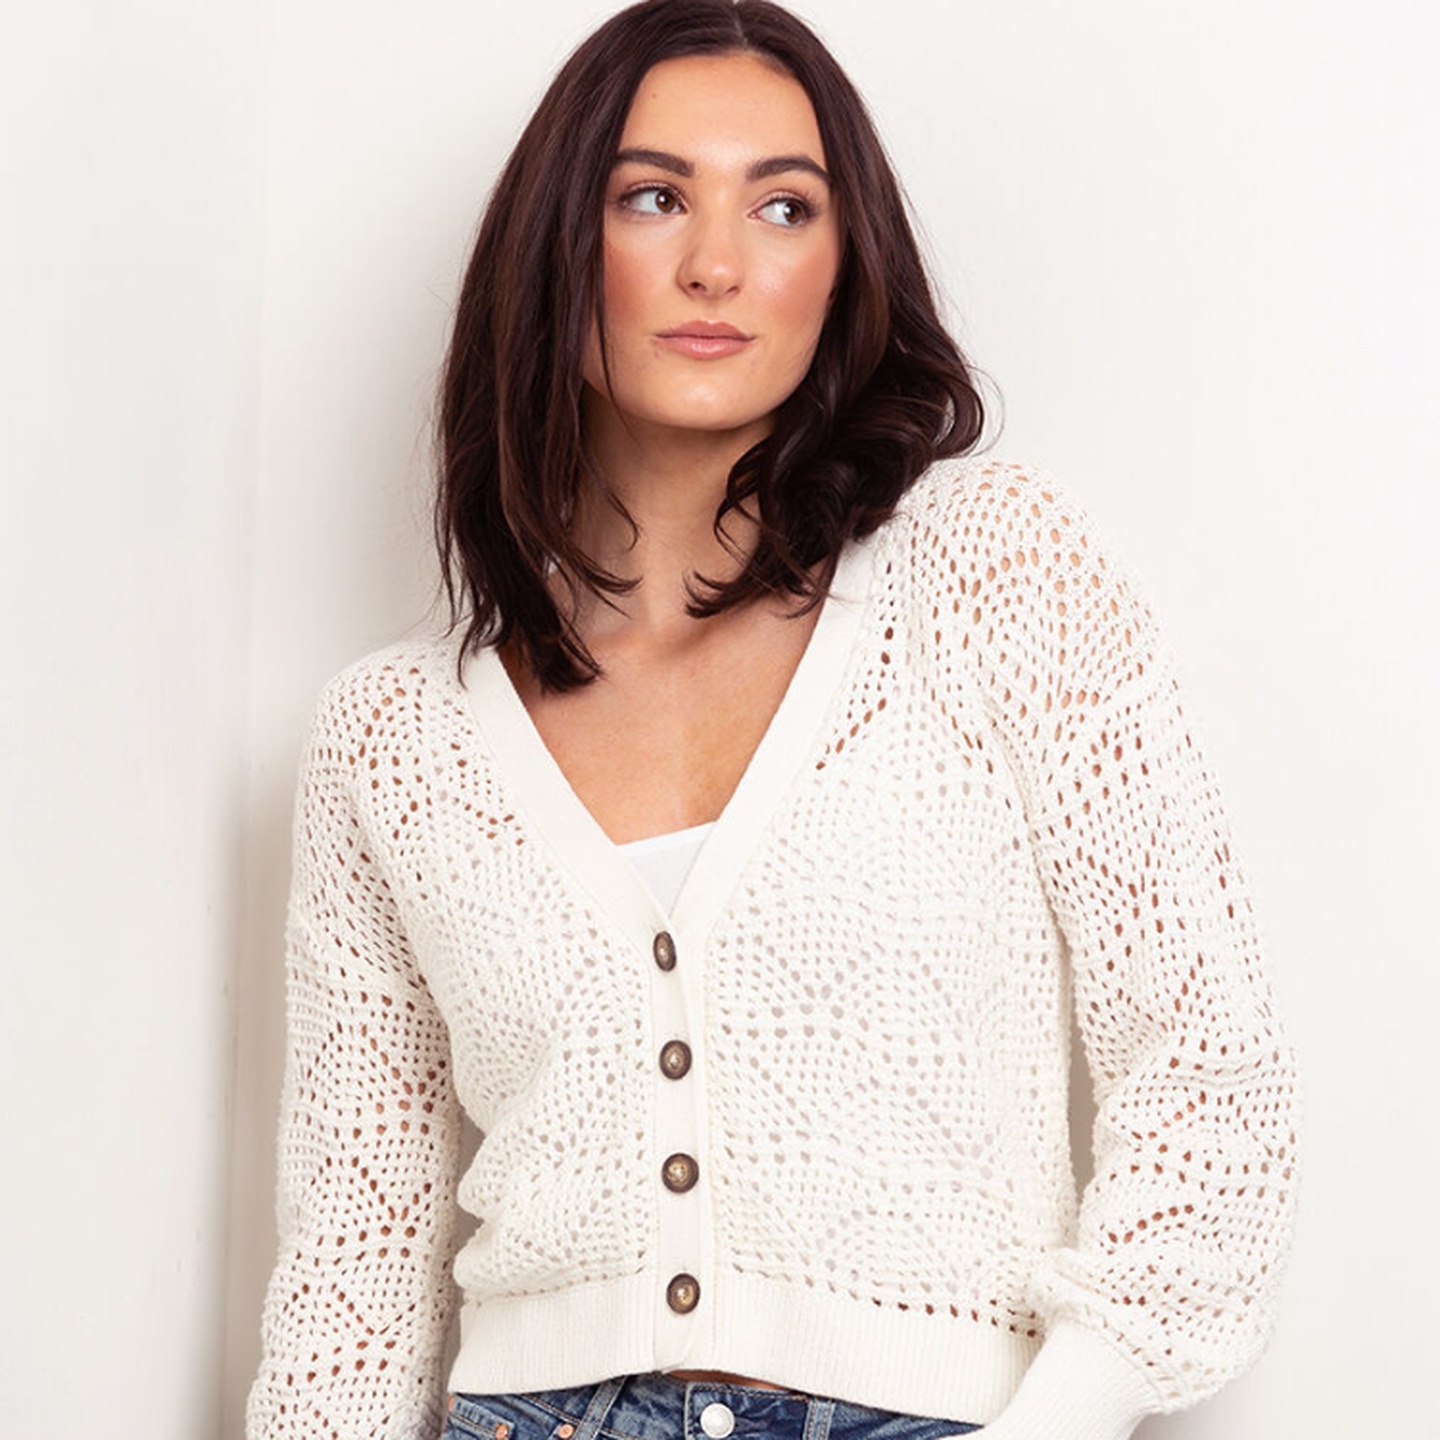 Shirts with peplum or lace details 